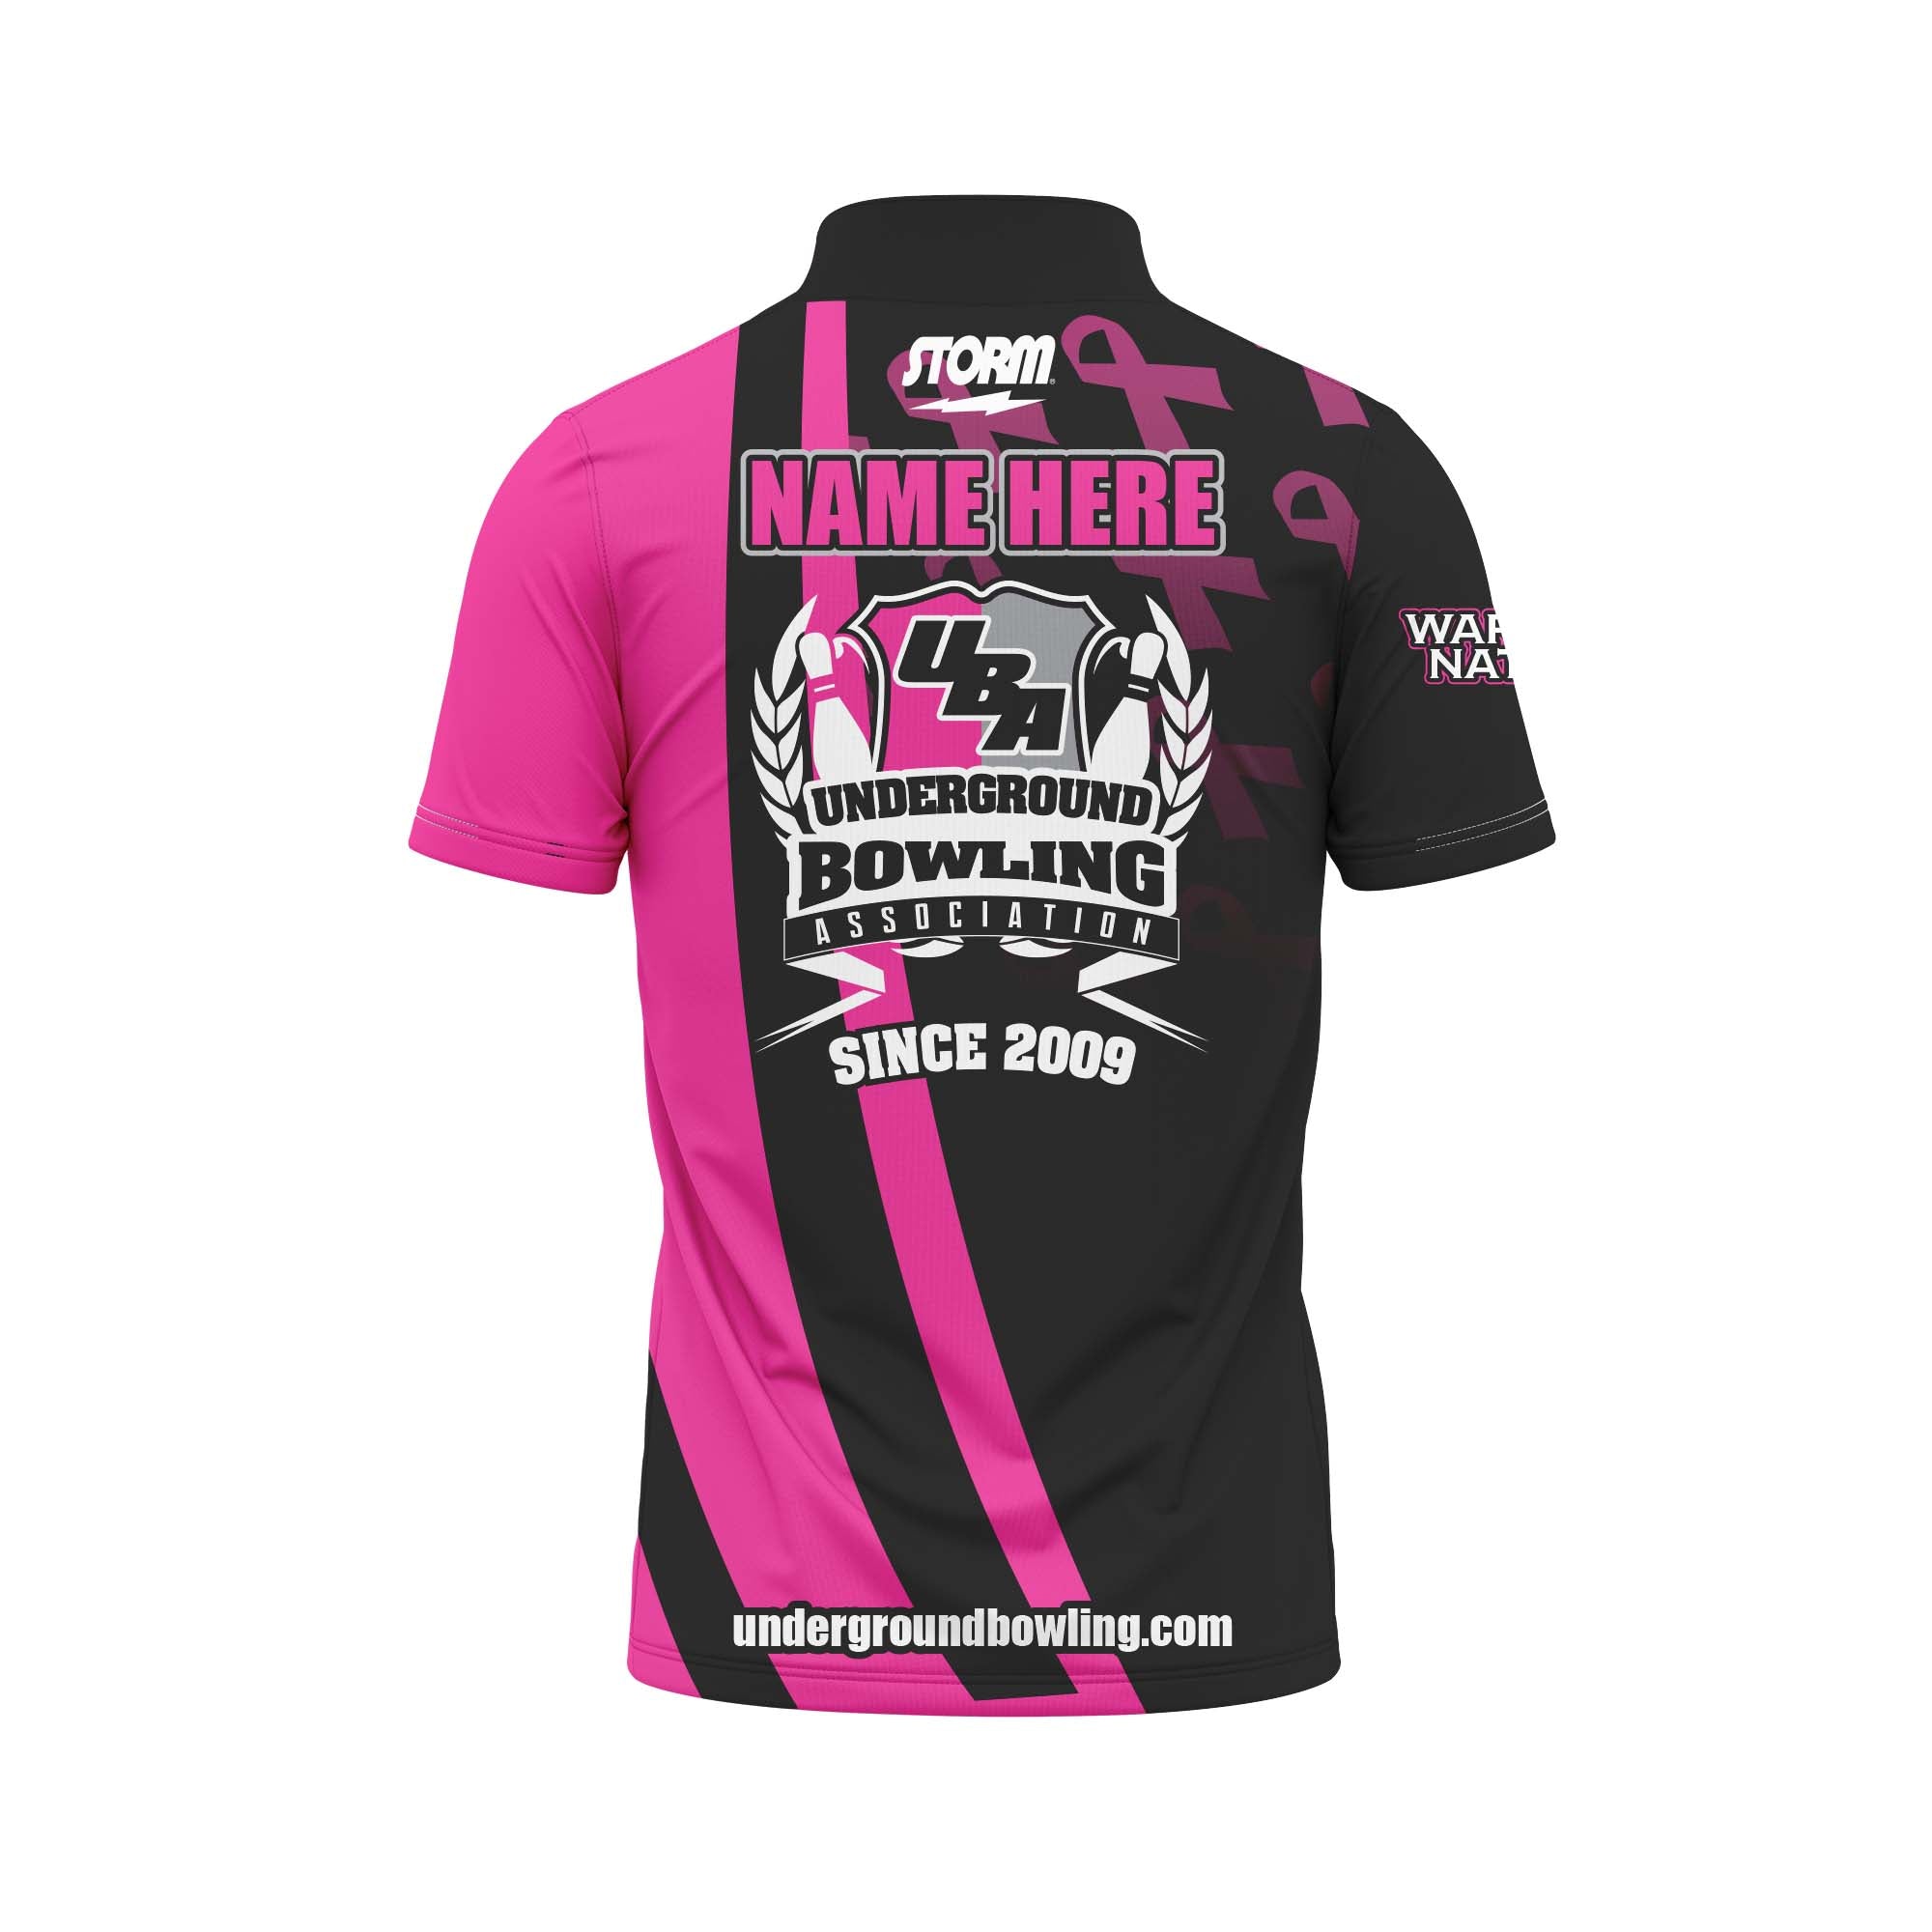 Gate City Warriors Breast Cancer Jersey